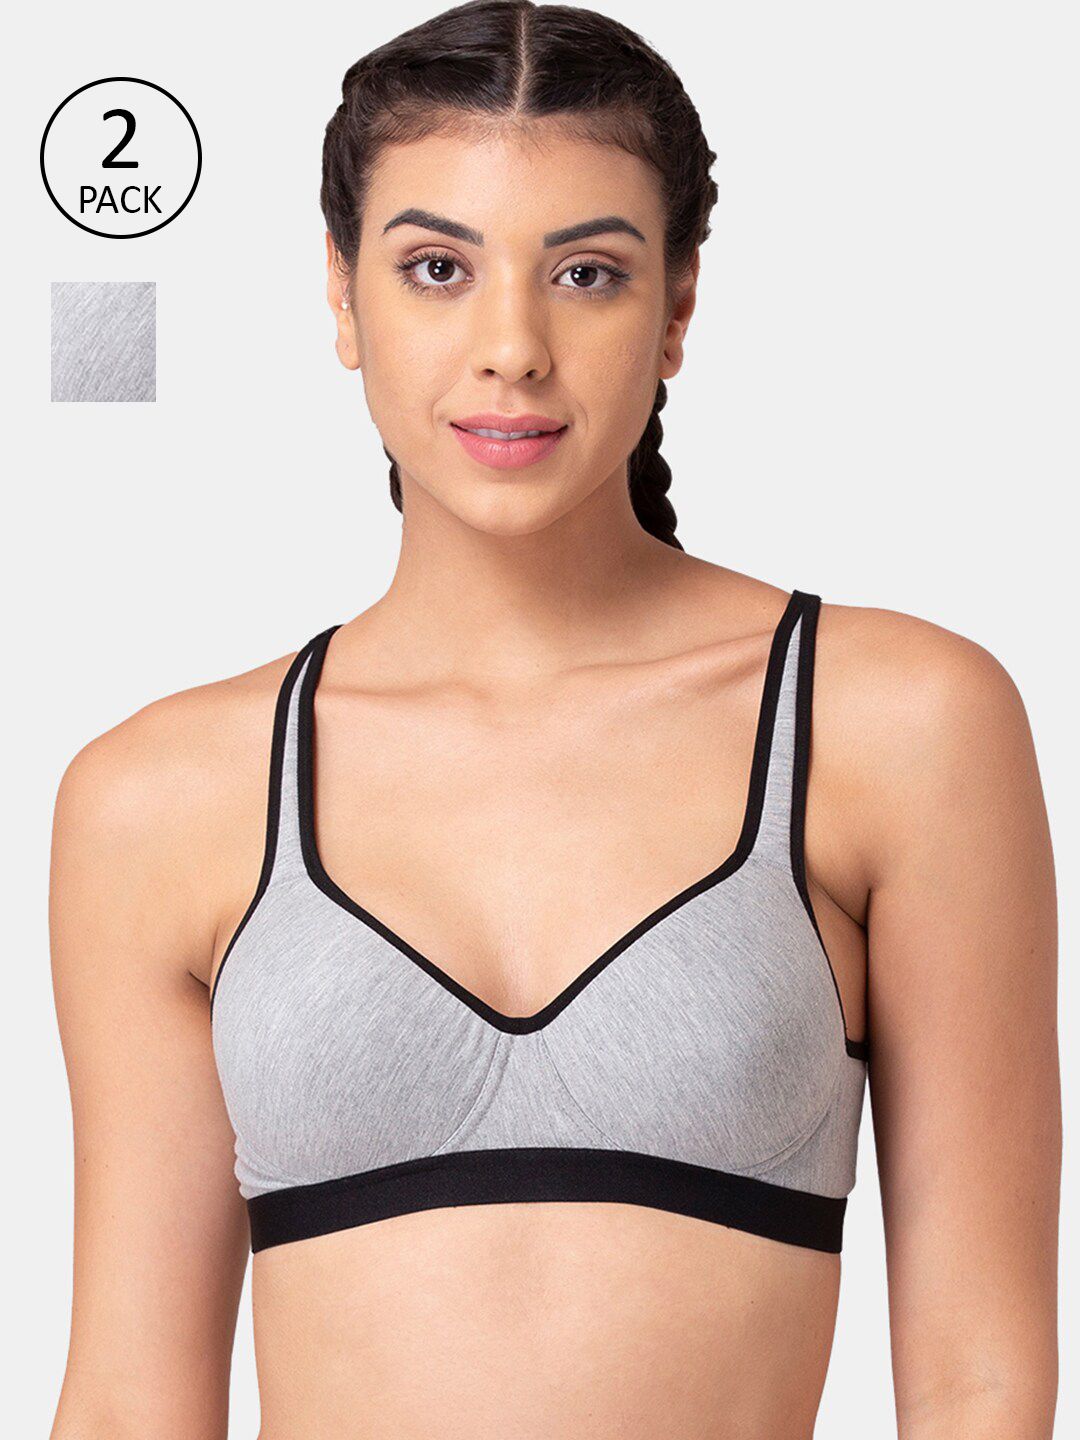 Tweens Pack Of 2 Grey & Black T-shirt Bra Lightly Padded TLW-405-2PC-GRY Price in India